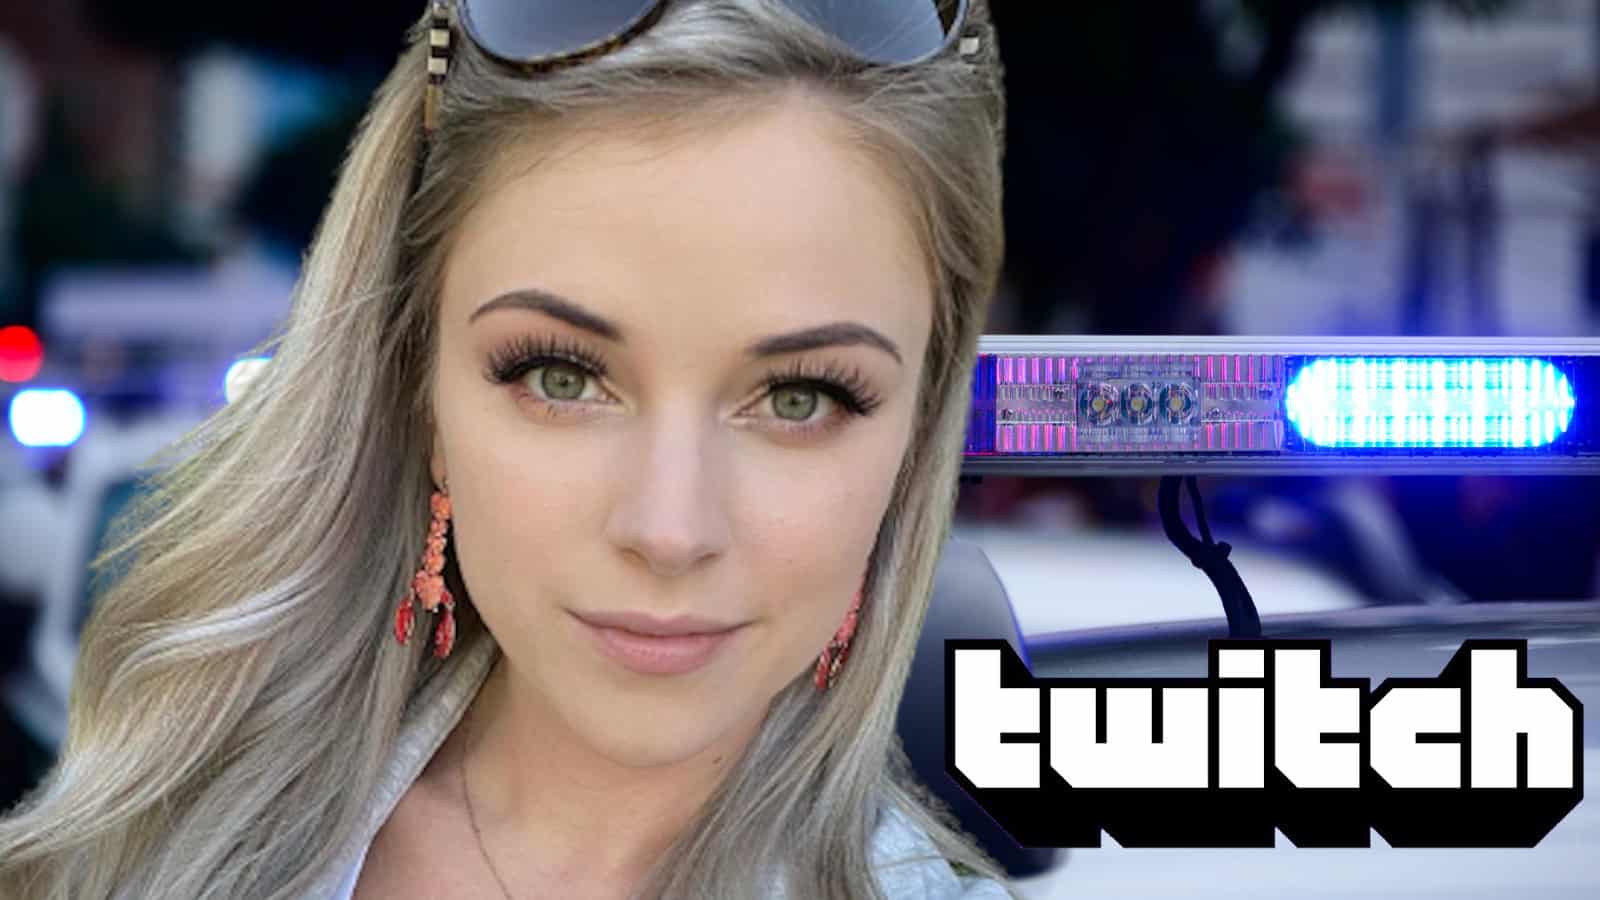 xoaeriel calls police after people show up during Twitch stream